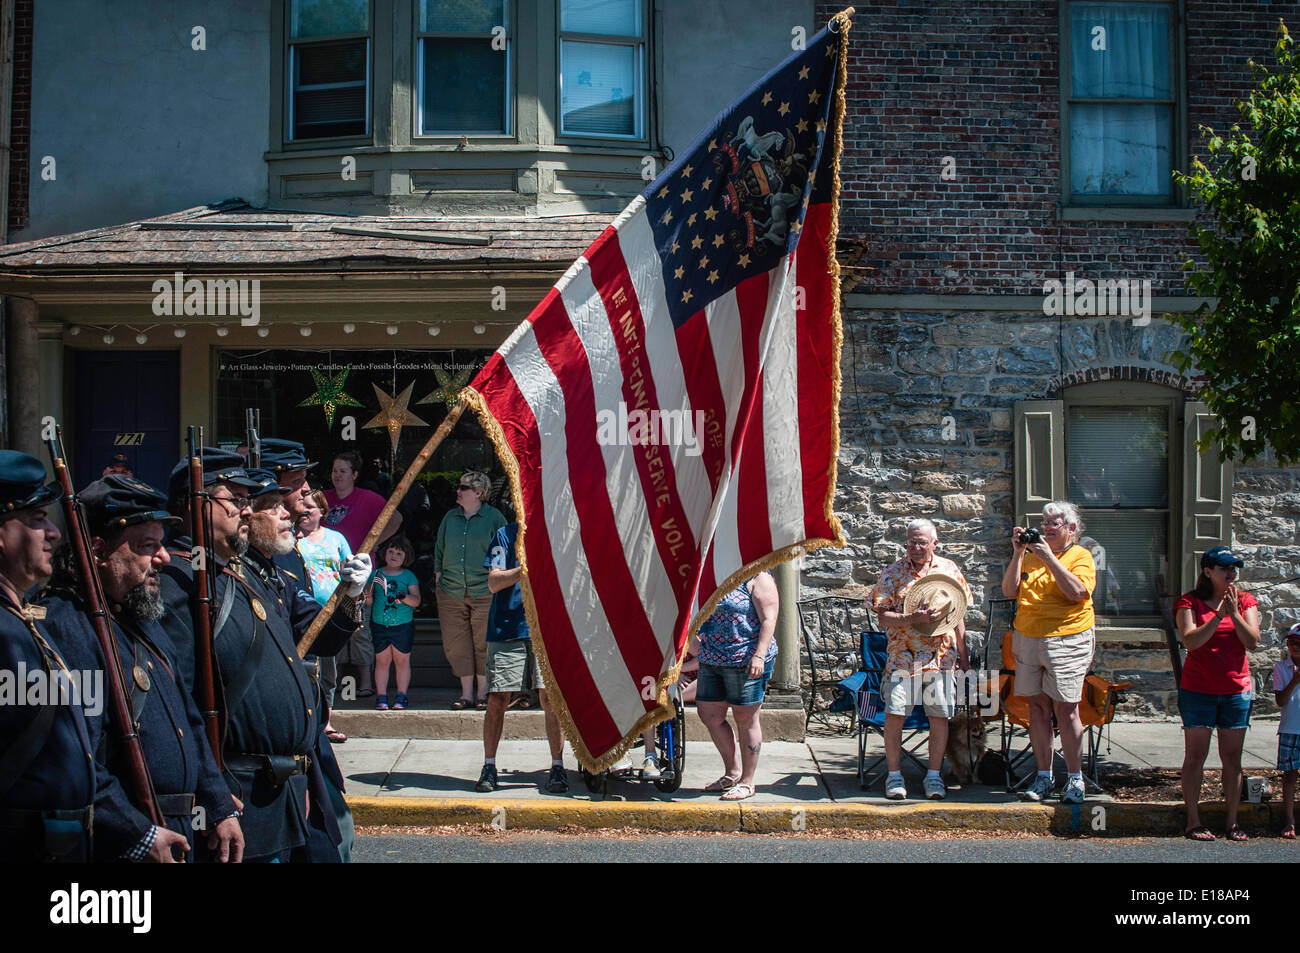 Lititz, PA, USA. 2. Memorial Day Parade and community march to local